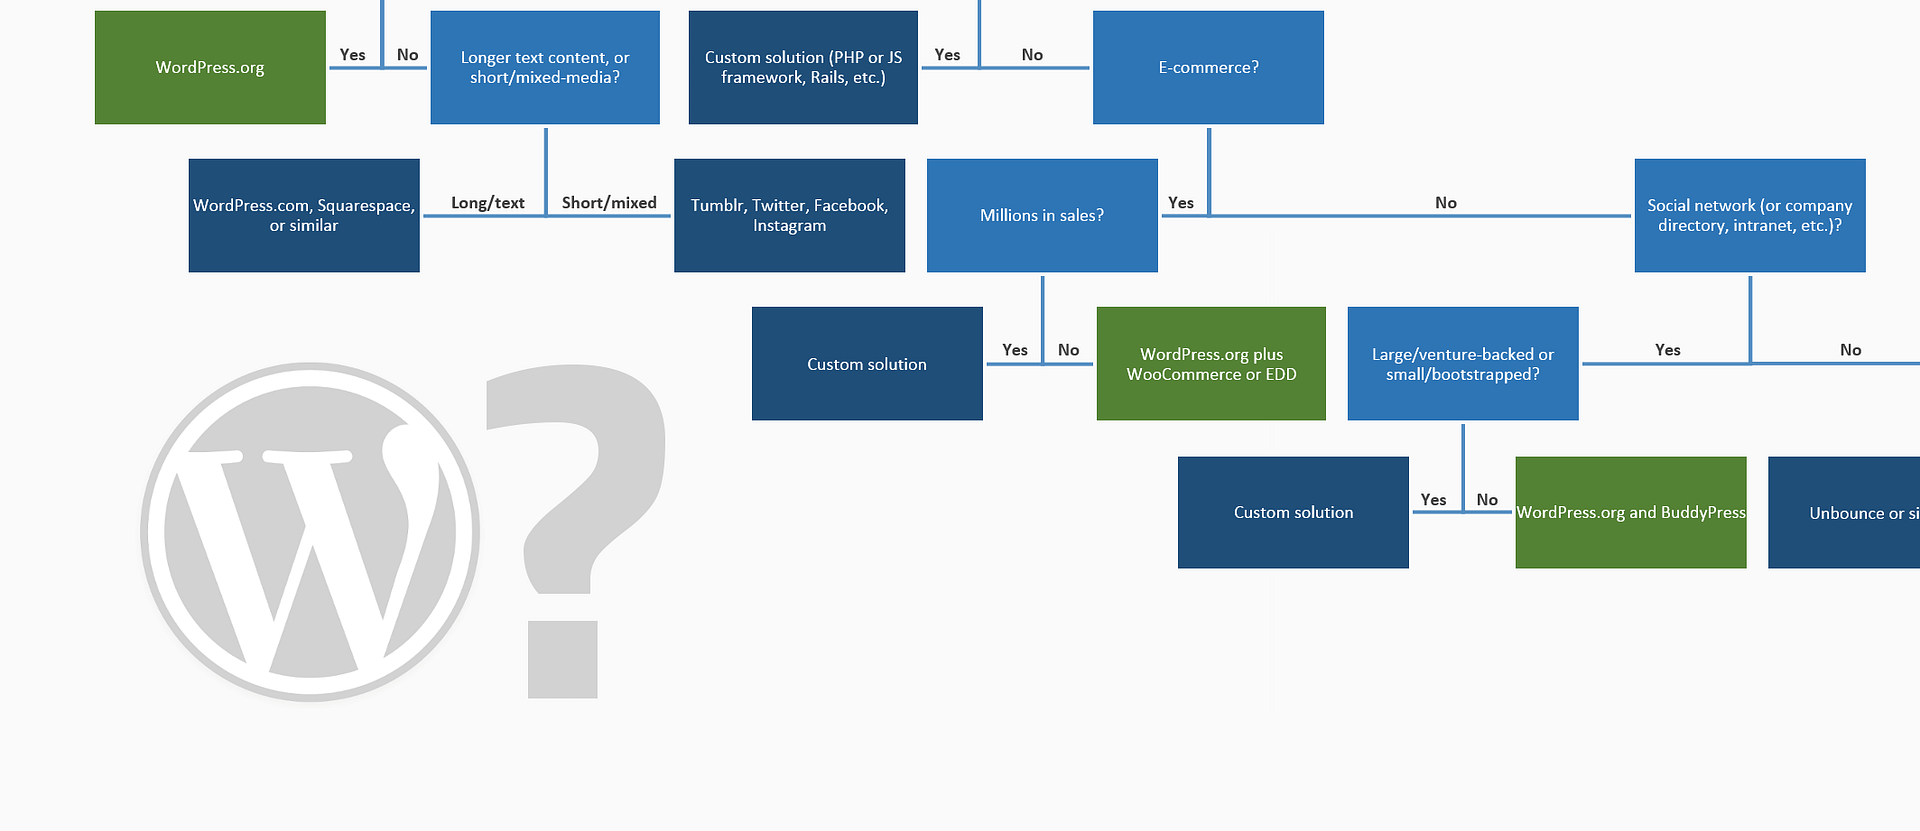 When To Use Wordpress The Flowchart Wpshout